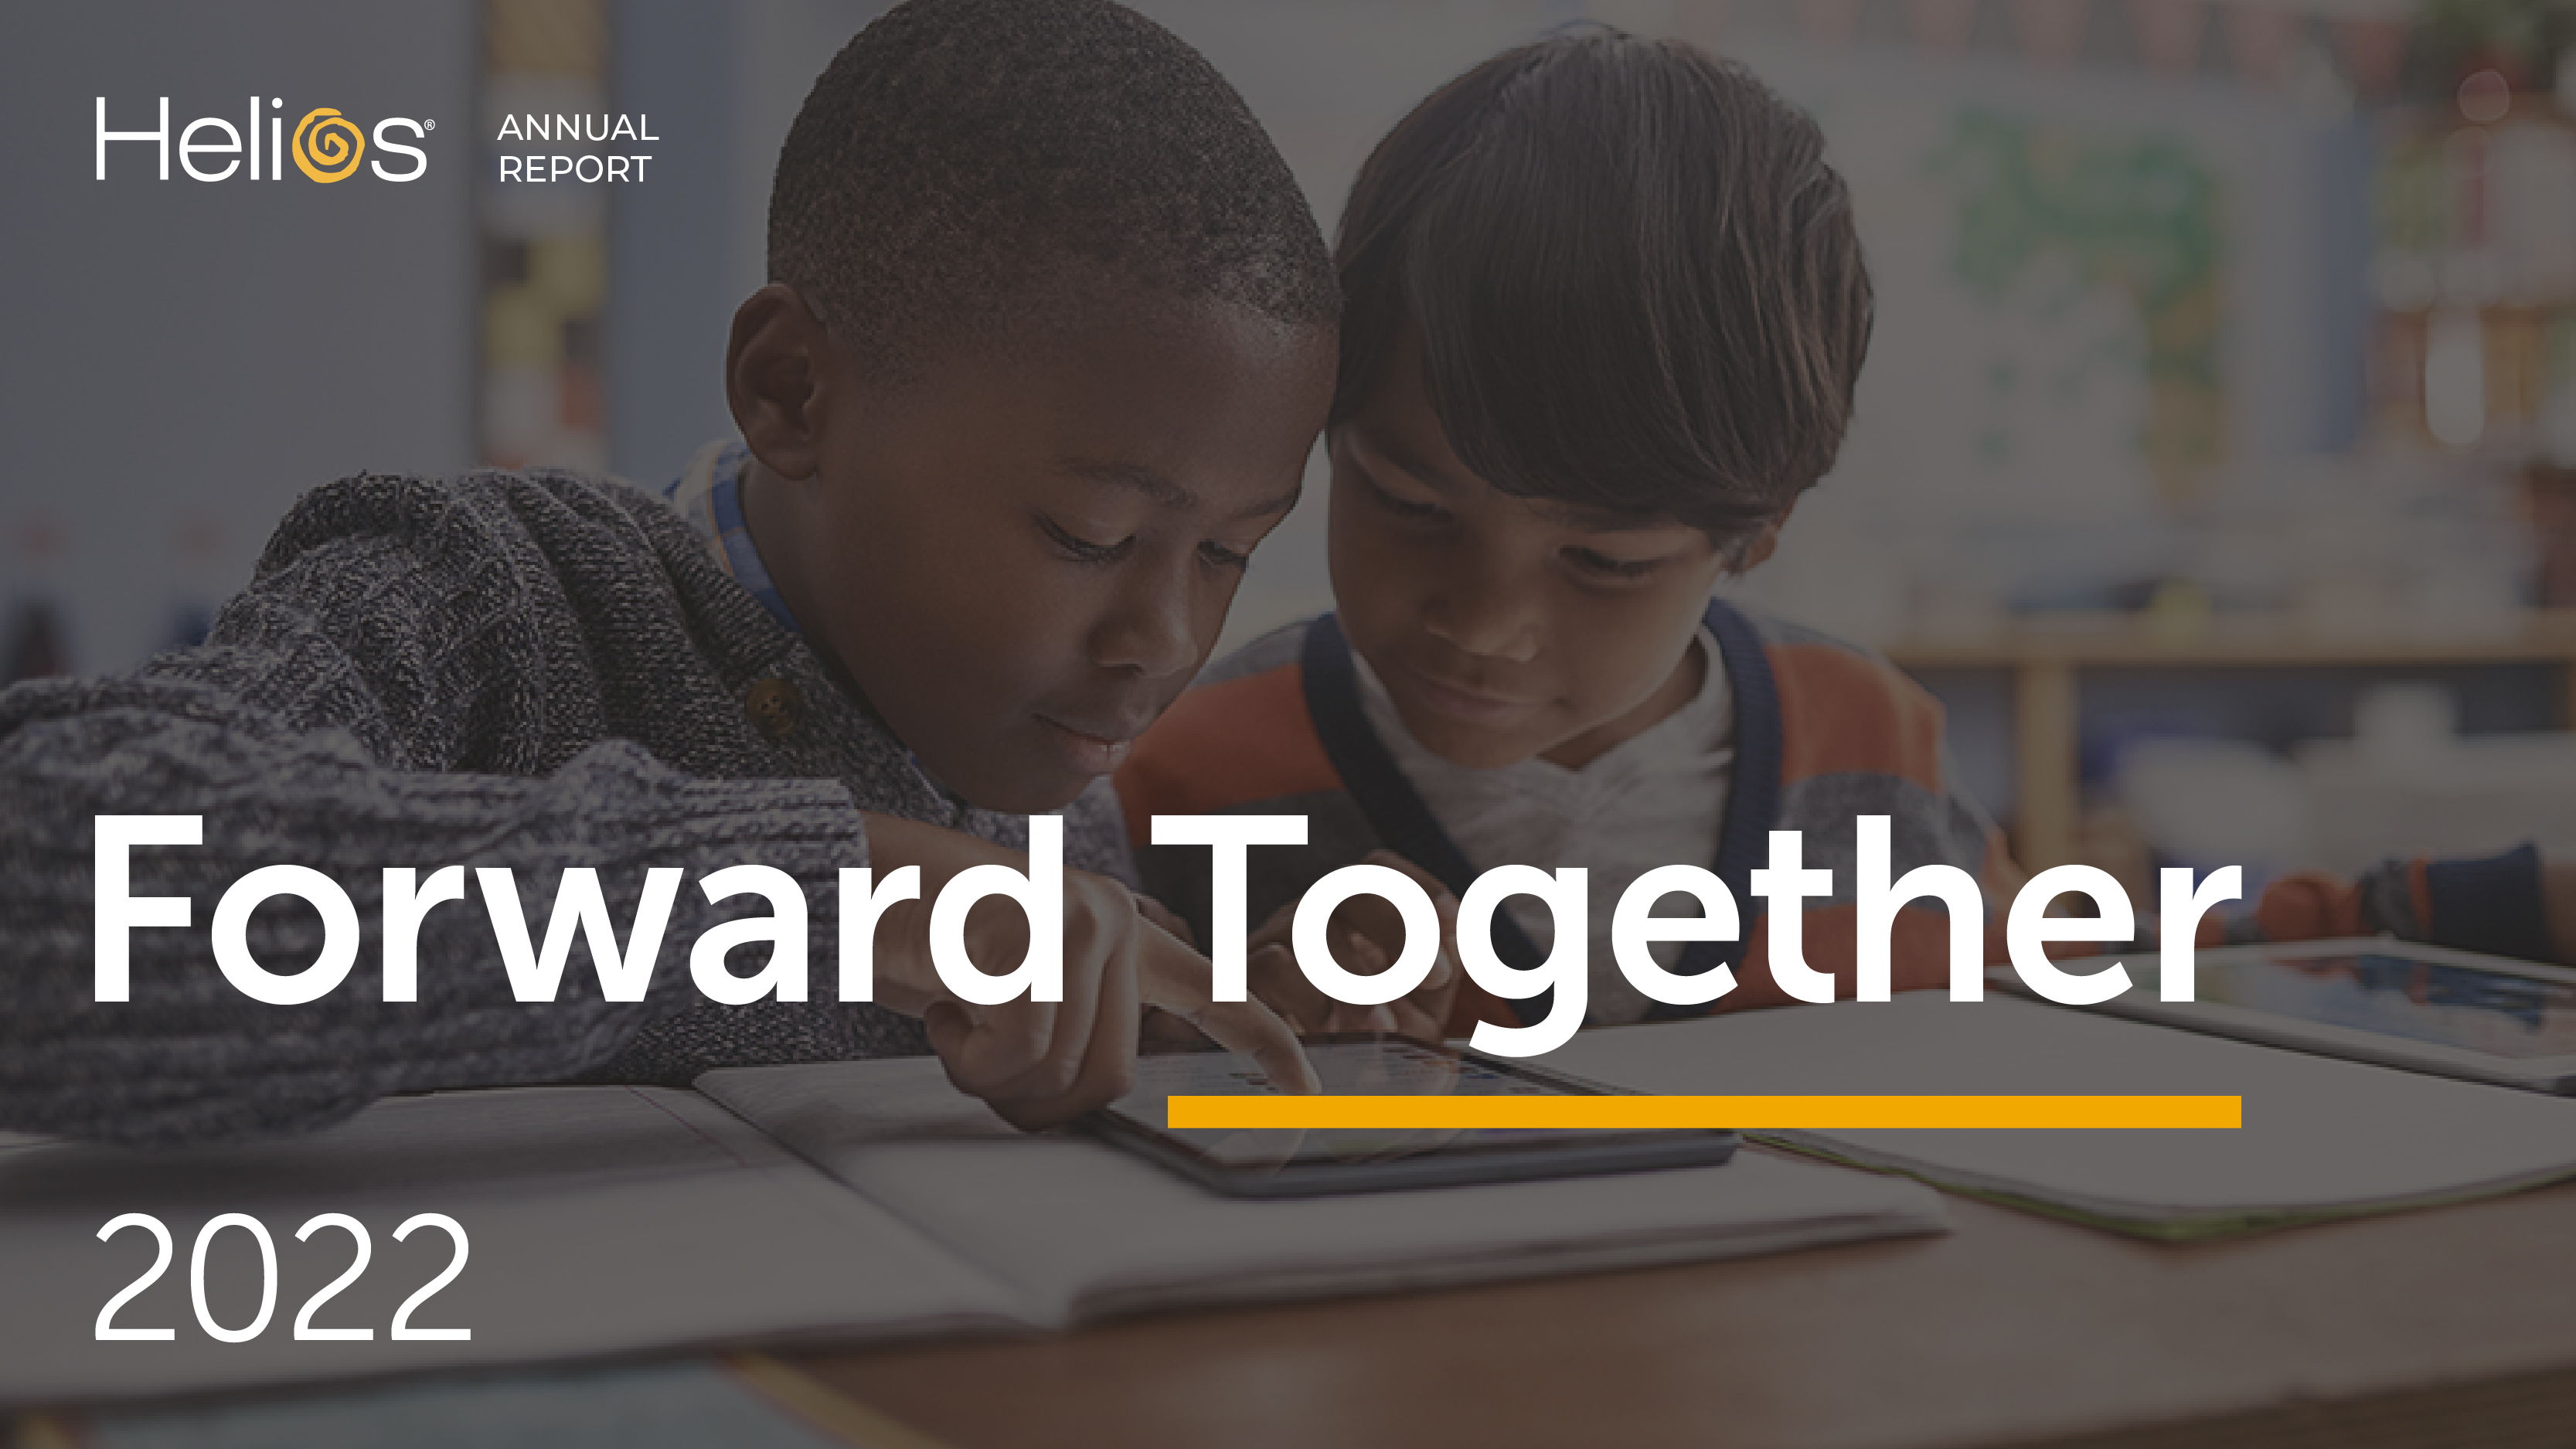 Forward Together - 2022 Annual Report